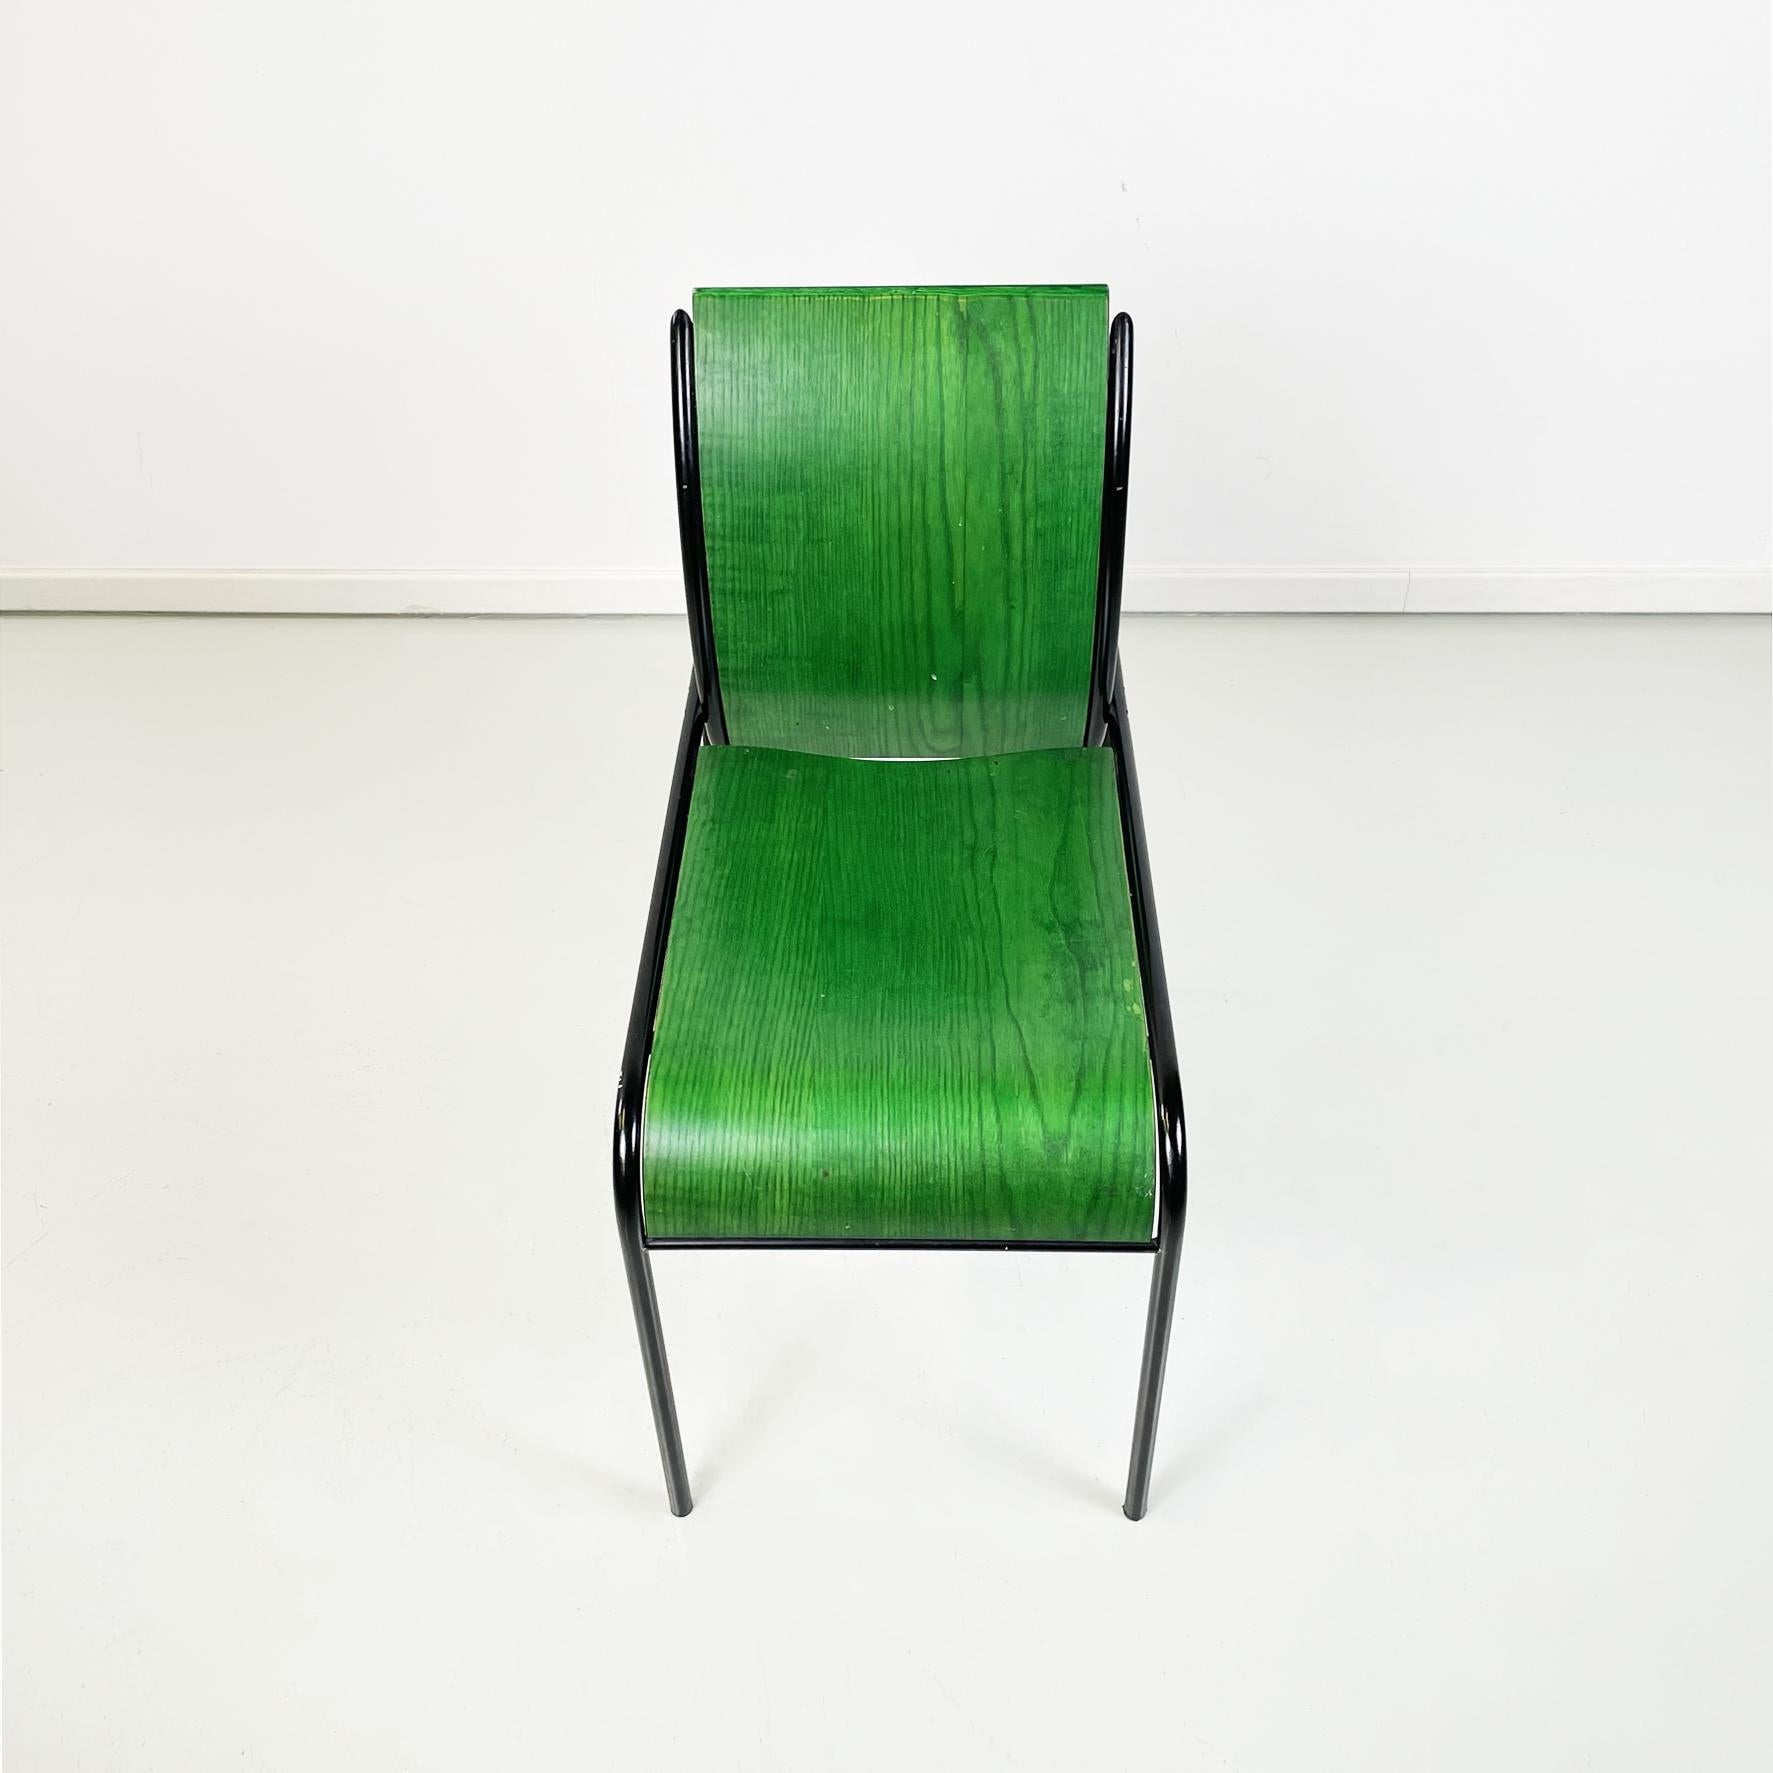 Metal Italian modern Green wood black metal chair Kim by De Lucchi for Memphis, 1980s For Sale